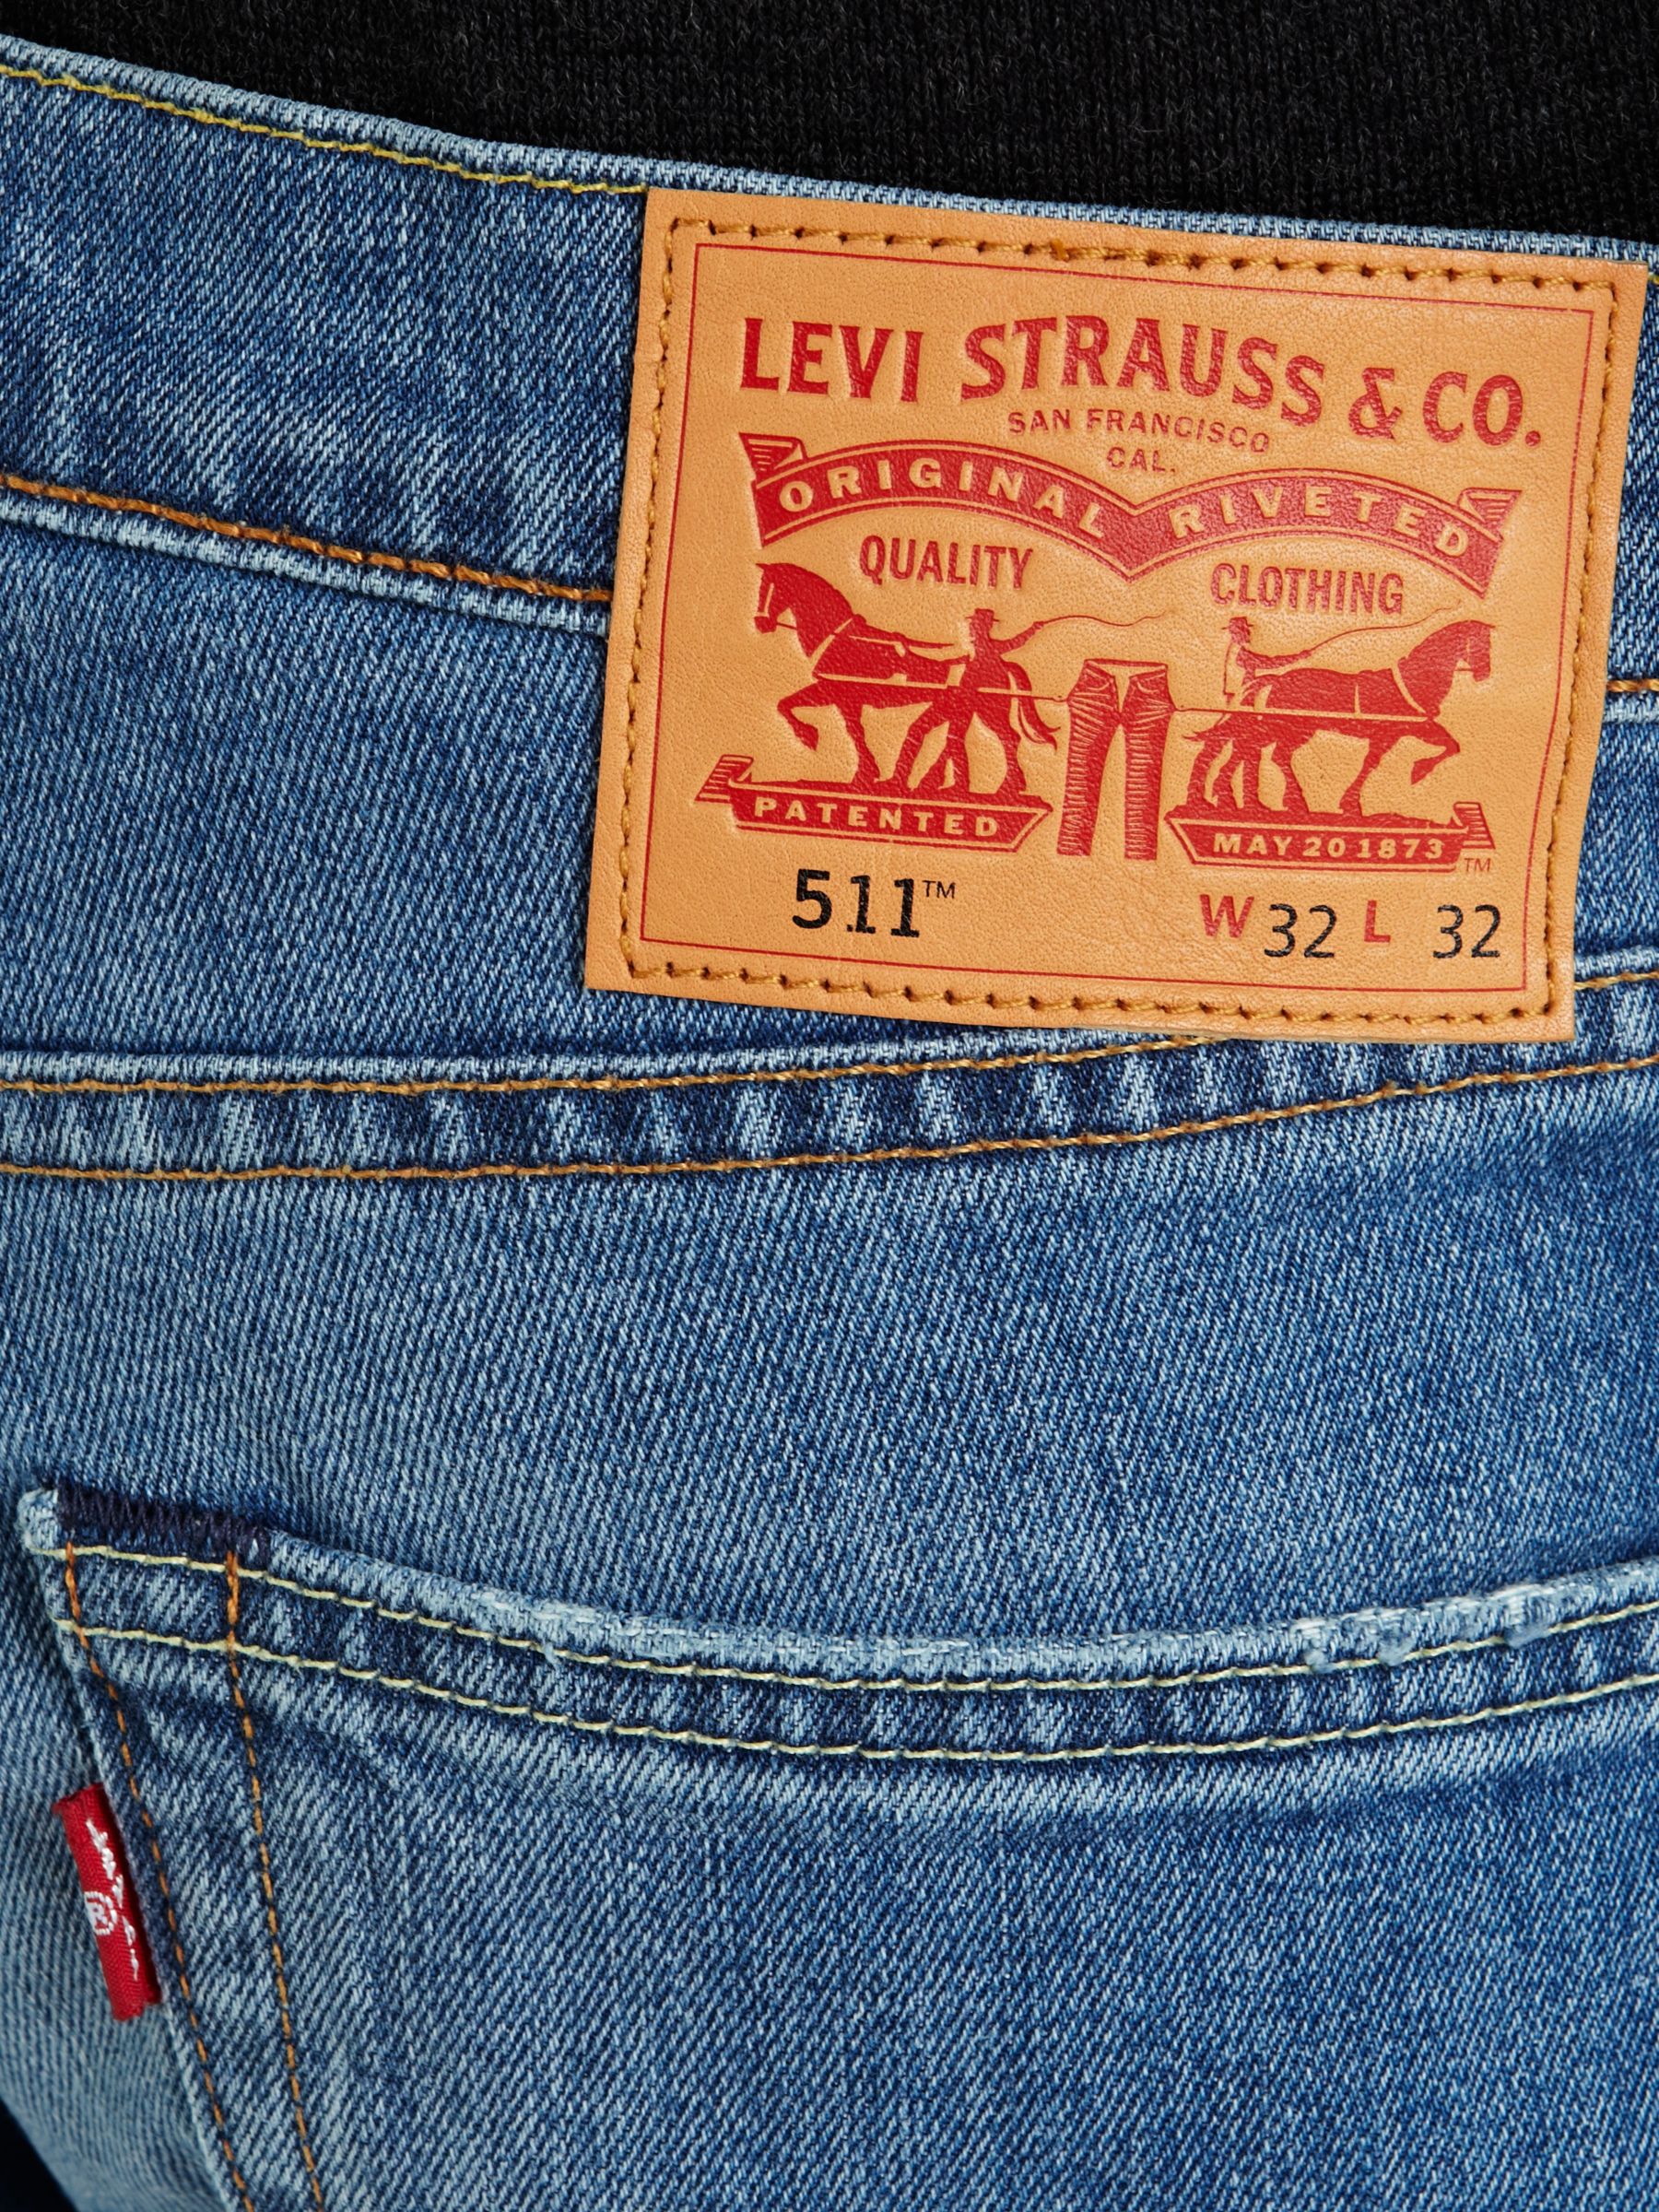 may 20 1873 levi's